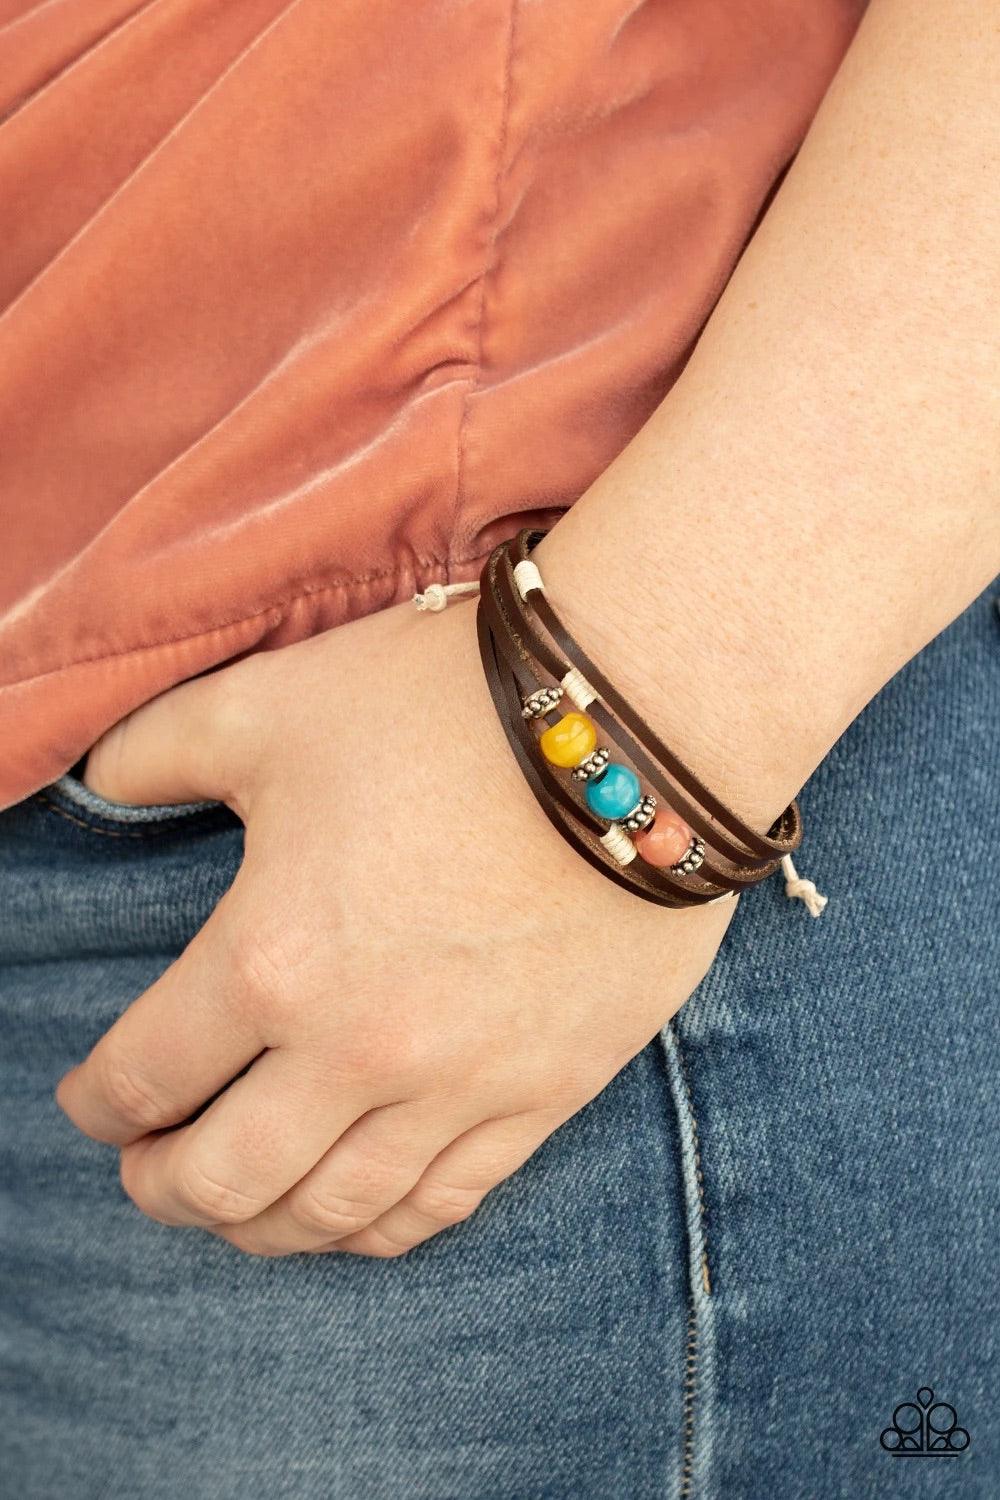 Paparazzi Accessories Homespun Radiance - Multi Infused with studded silver accents, a row of Desert Mist, Blue Tint, and Illuminating cat's eye stone beads adorn the centermost strand of layered leather bands around the wrist for a colorful seasonal look